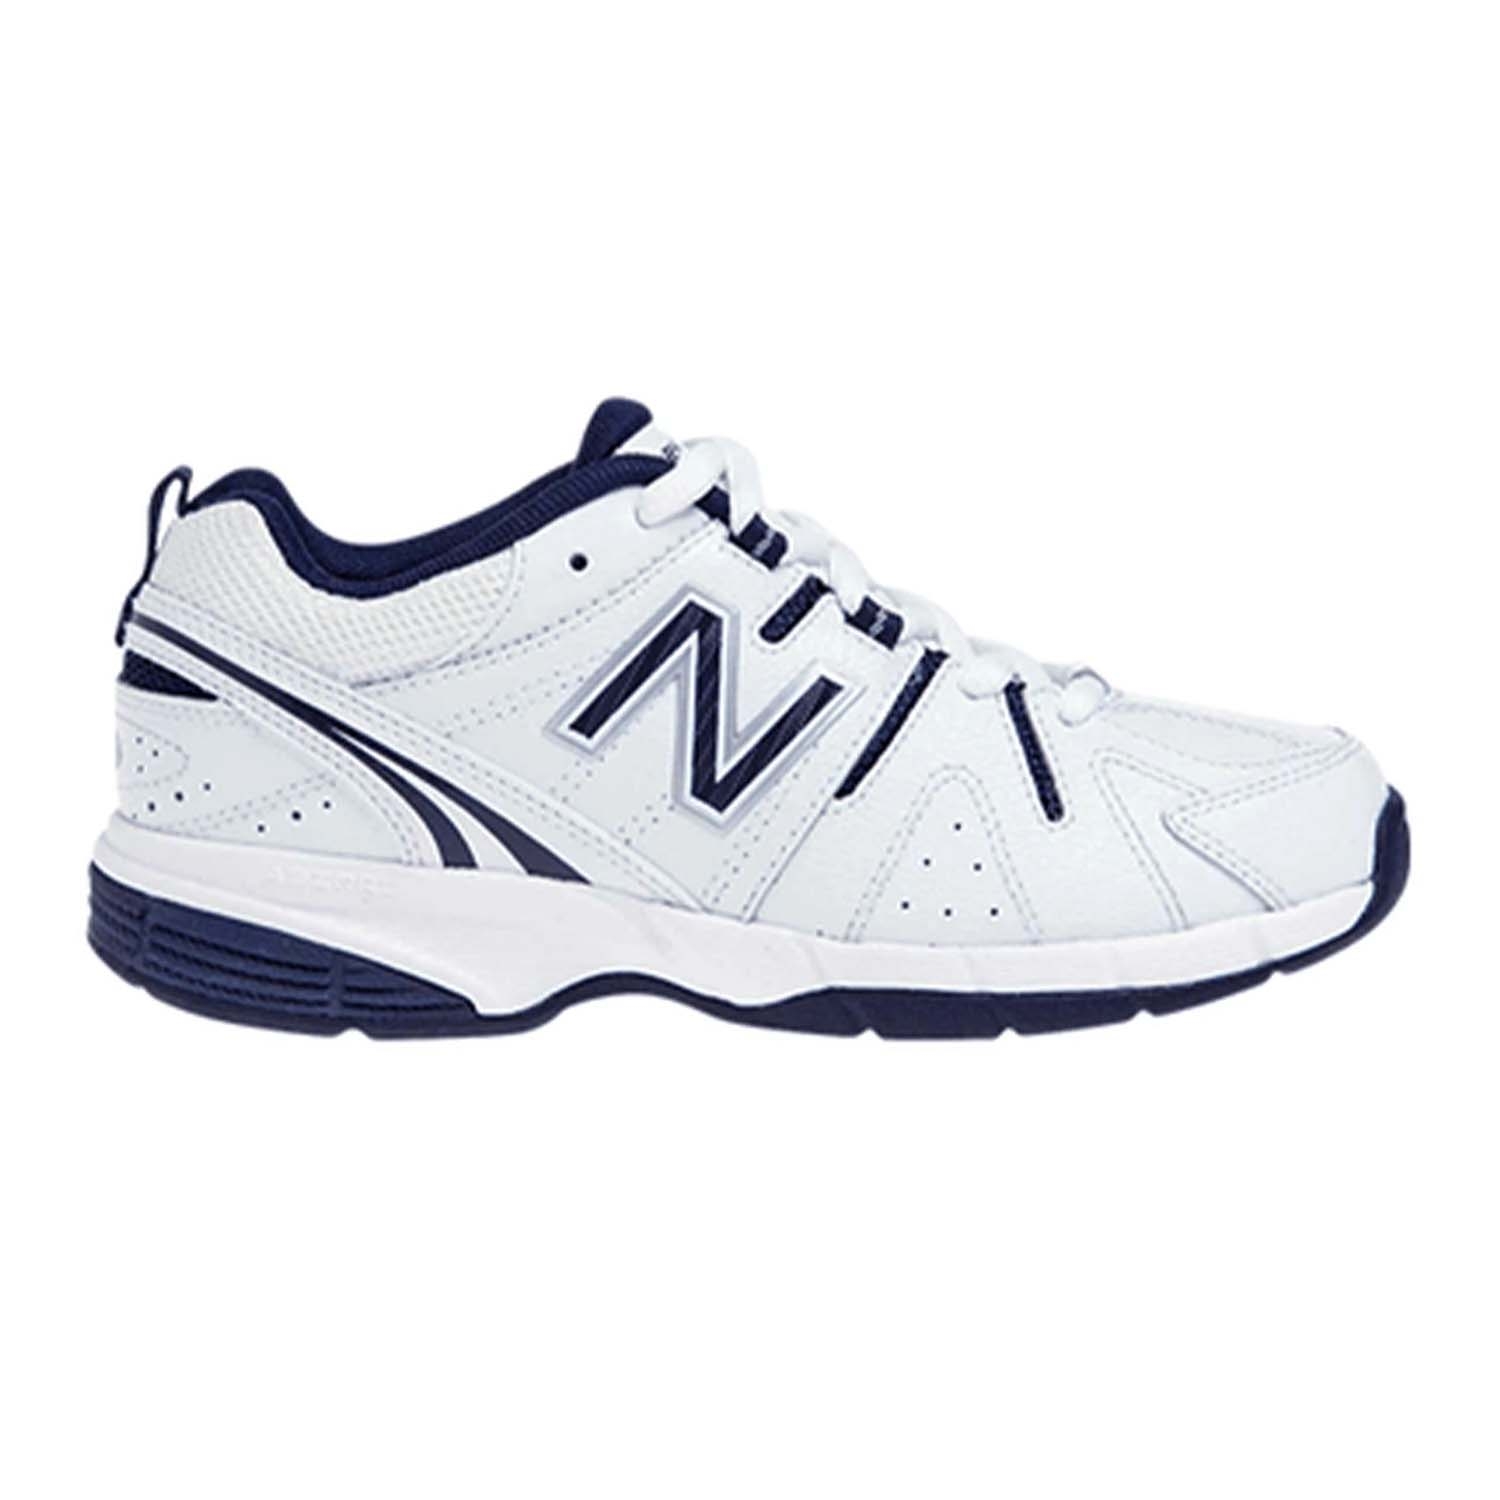 New Balance 625 (Laces) Kids Cross Training Shoes: White/Navy | Mike ...